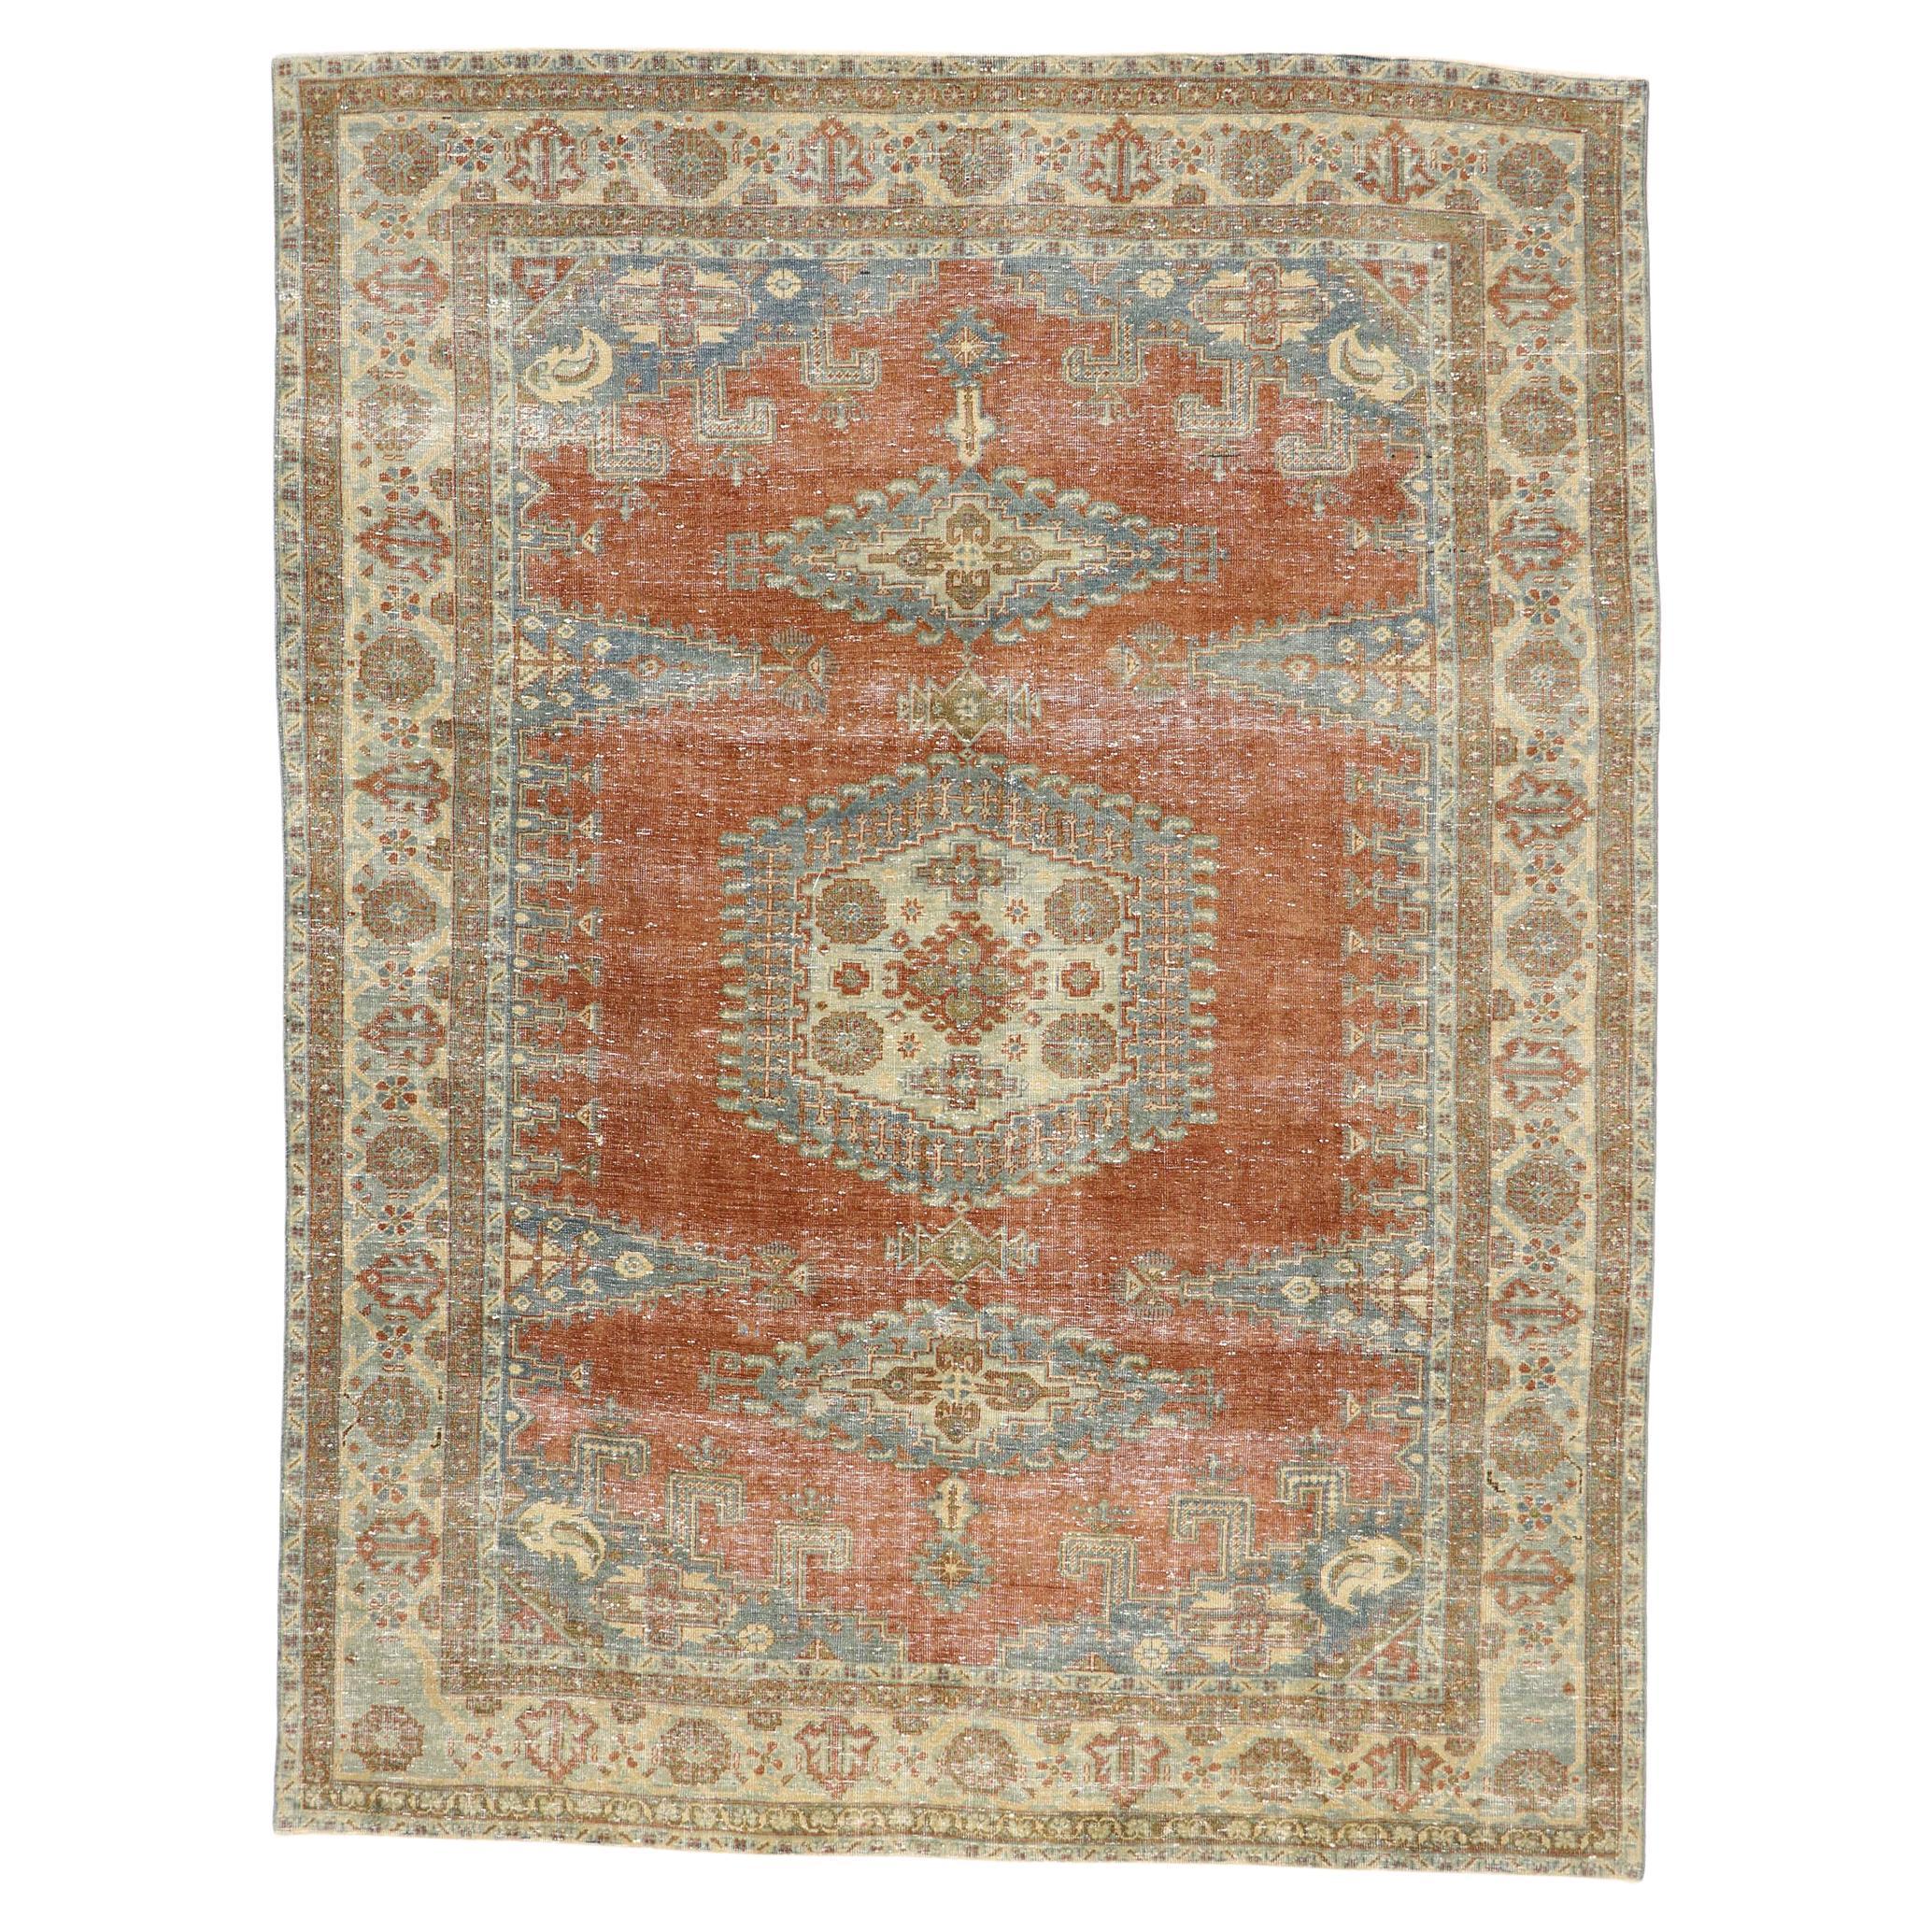 Distressed Vintage Persian Viss Rug with Rustic Tribal Style